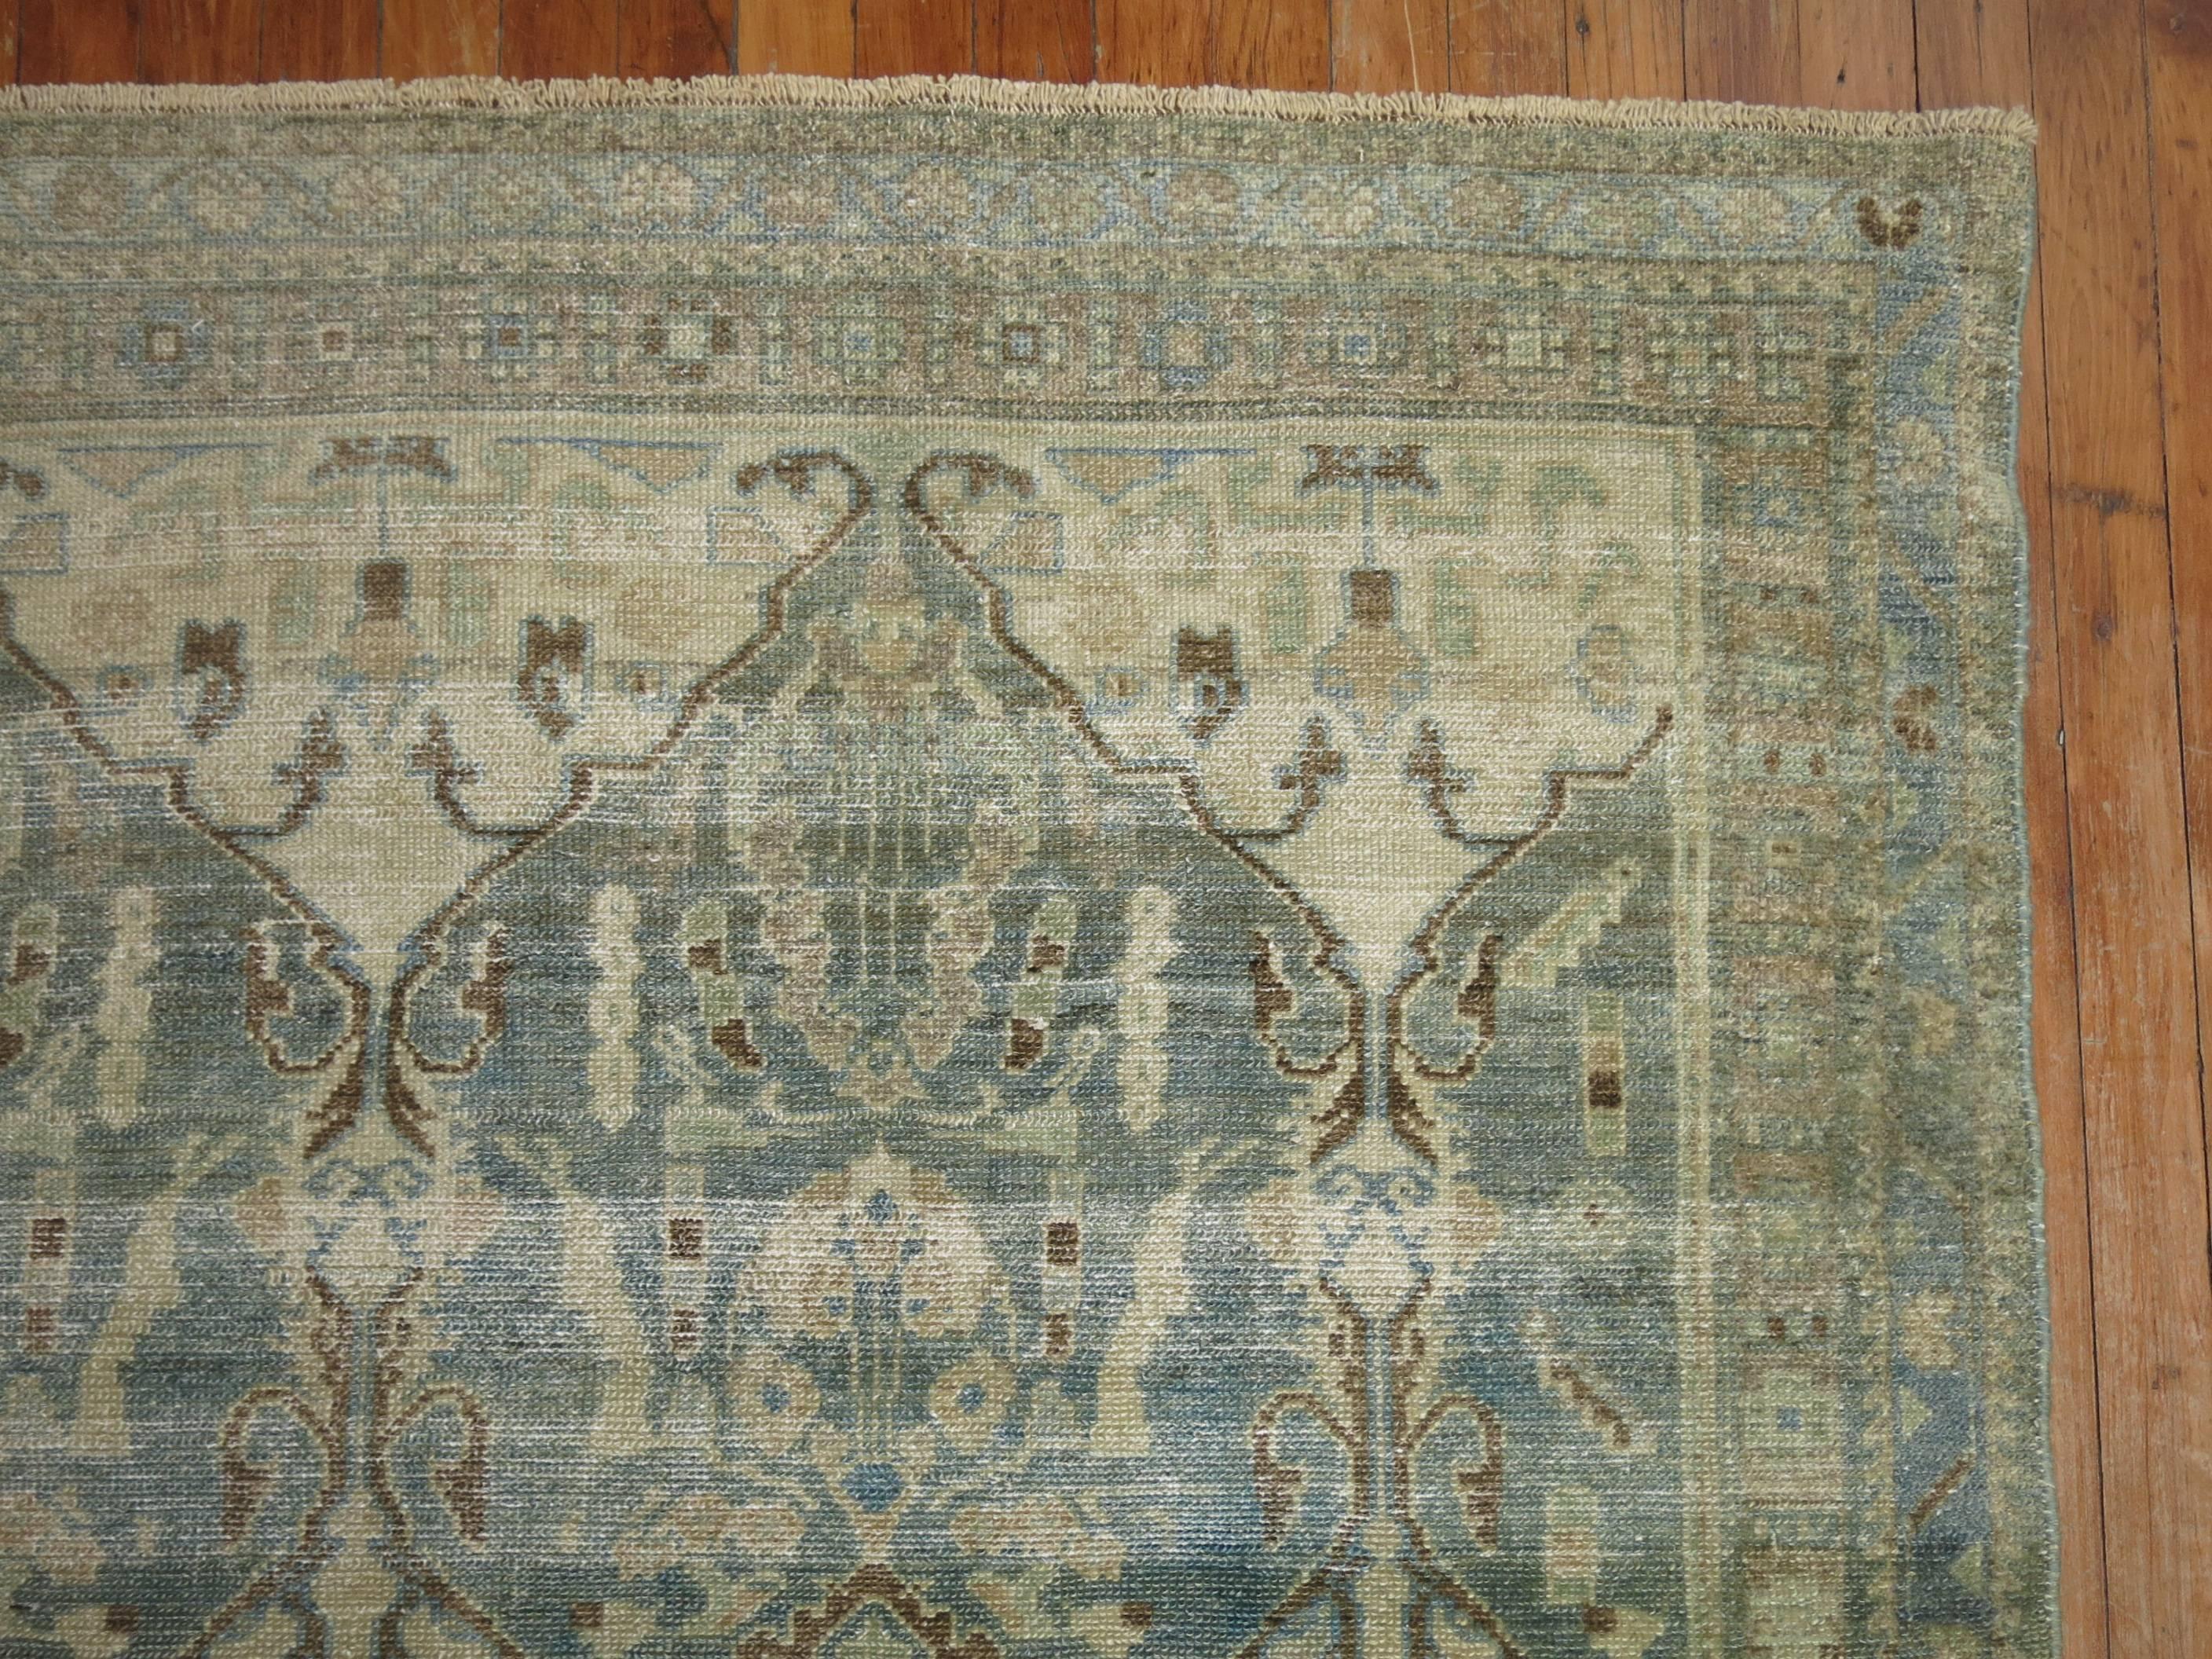 Hand-Woven Antique Persian Malayer Rug